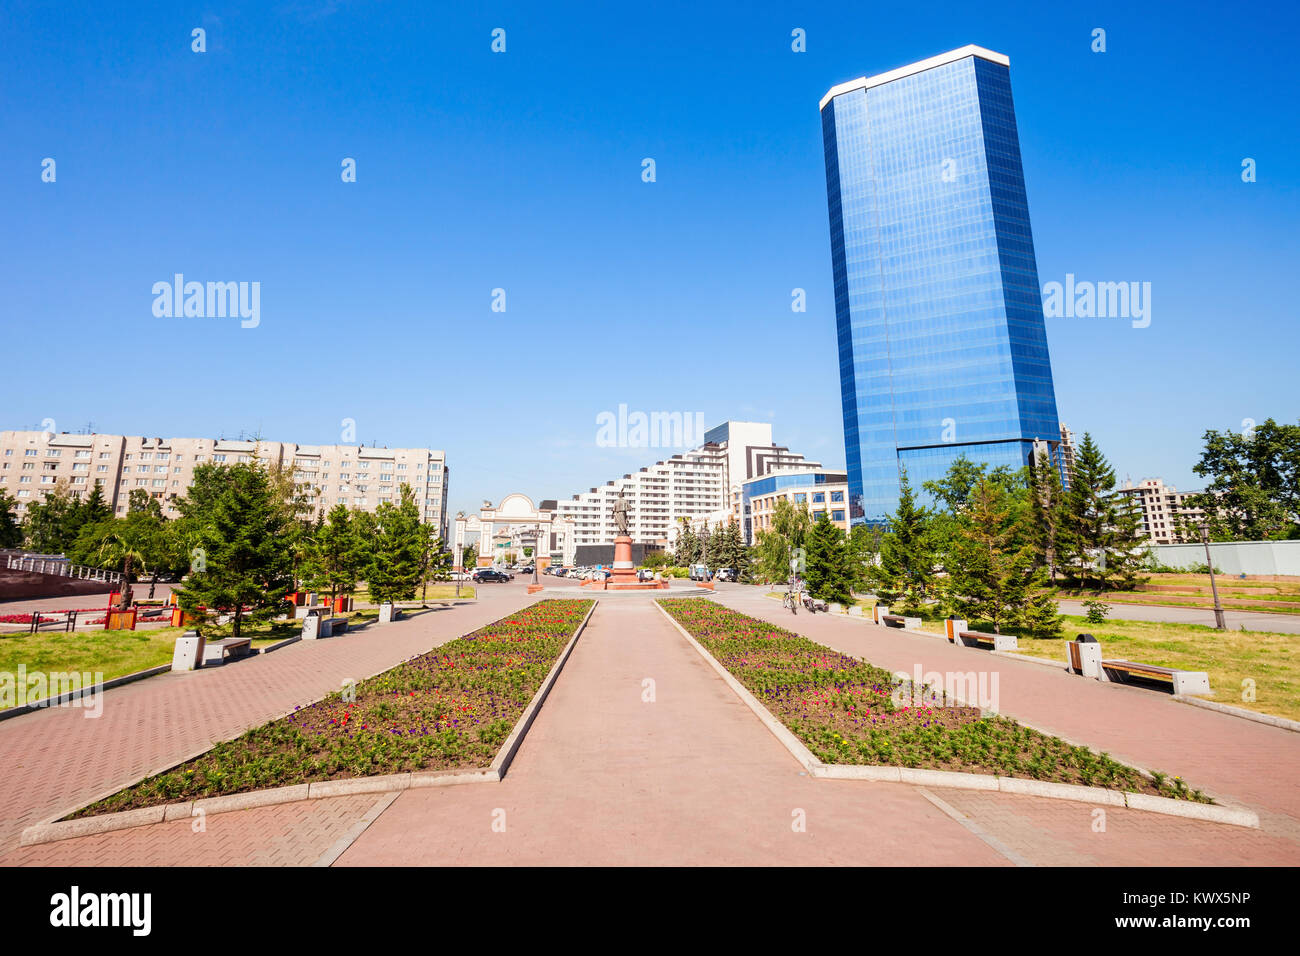 Business centre 'Panorama' on the Peace square in the center of Krasnoyarsk city in Russia Stock Photo